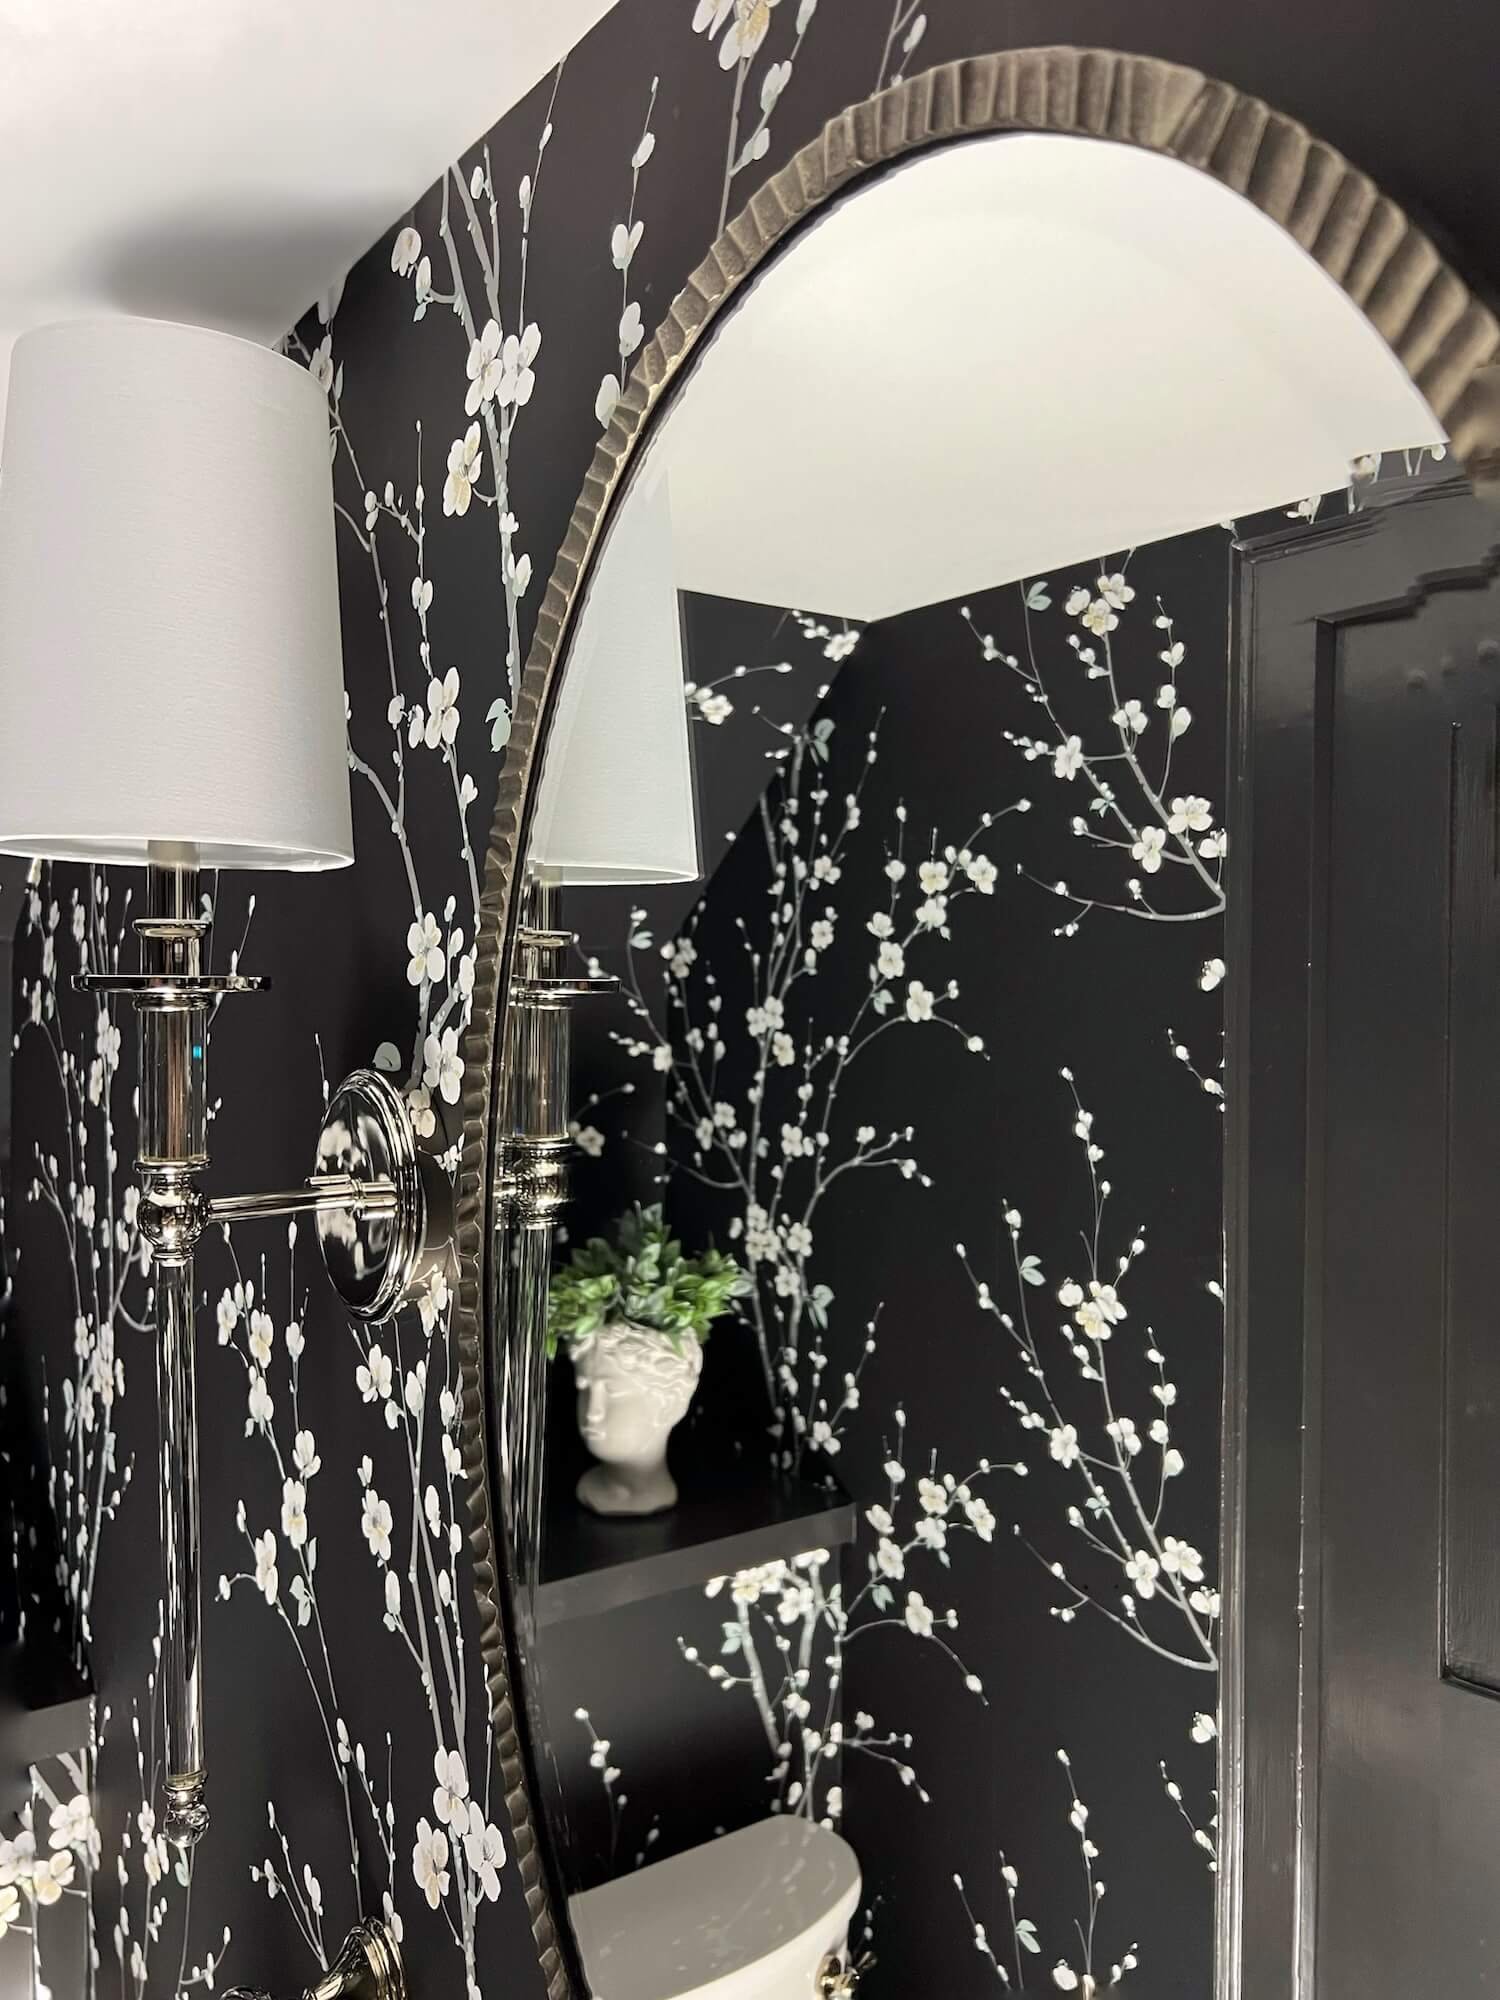 glossy black millwork and a silver framed mirror finish the space